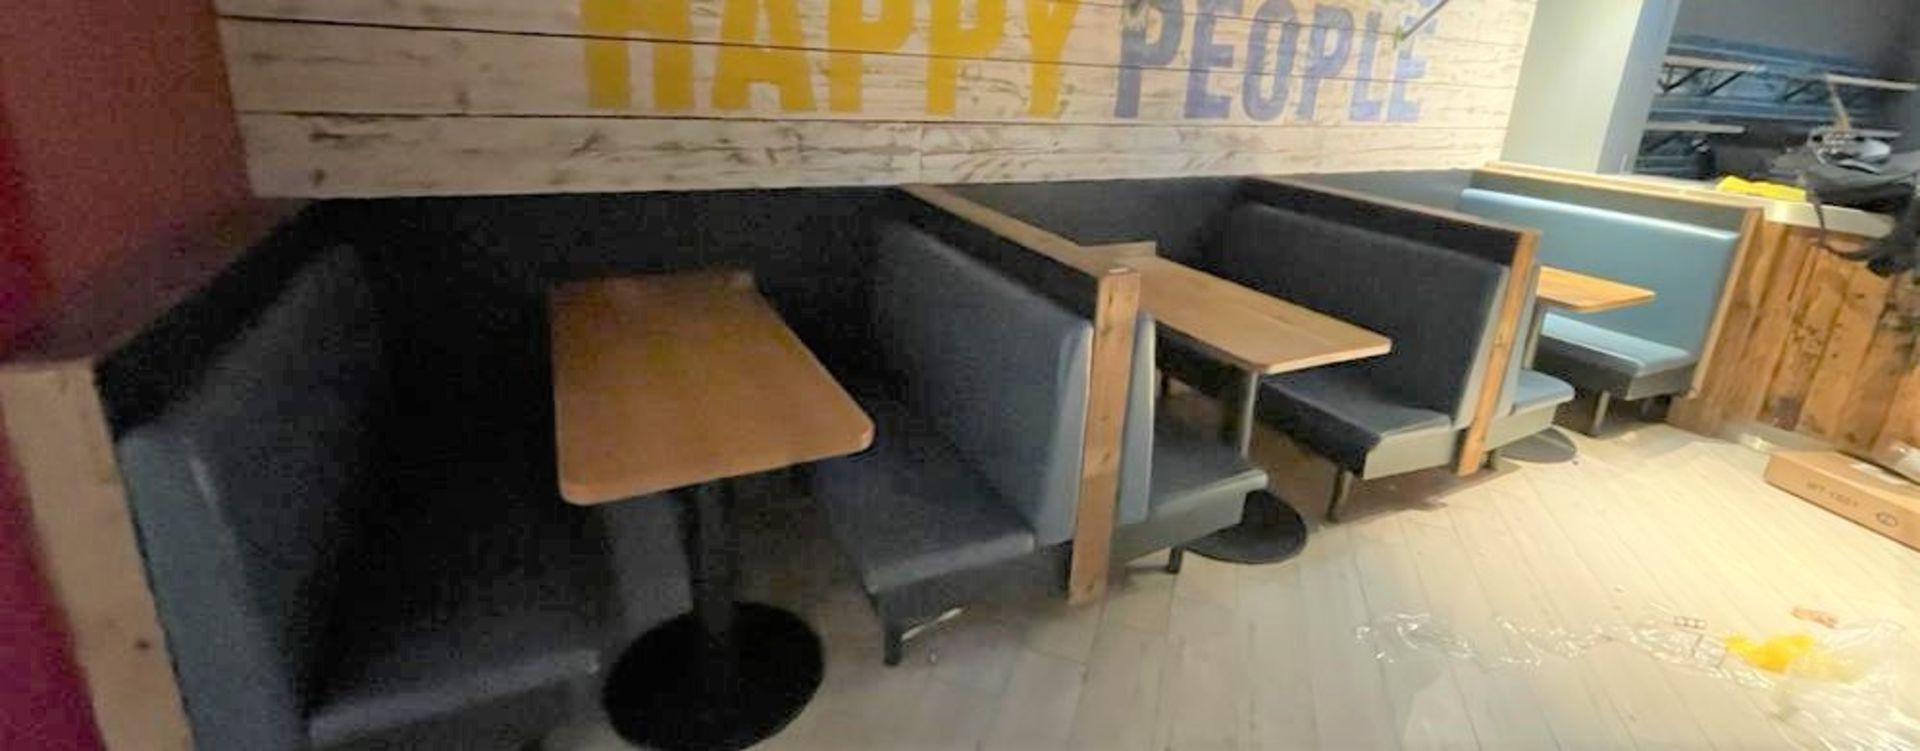 3 x Restaurant Leather Seating Booths With Oak Tables - Includes 6 x Seating Benches Upholstered - Image 7 of 11